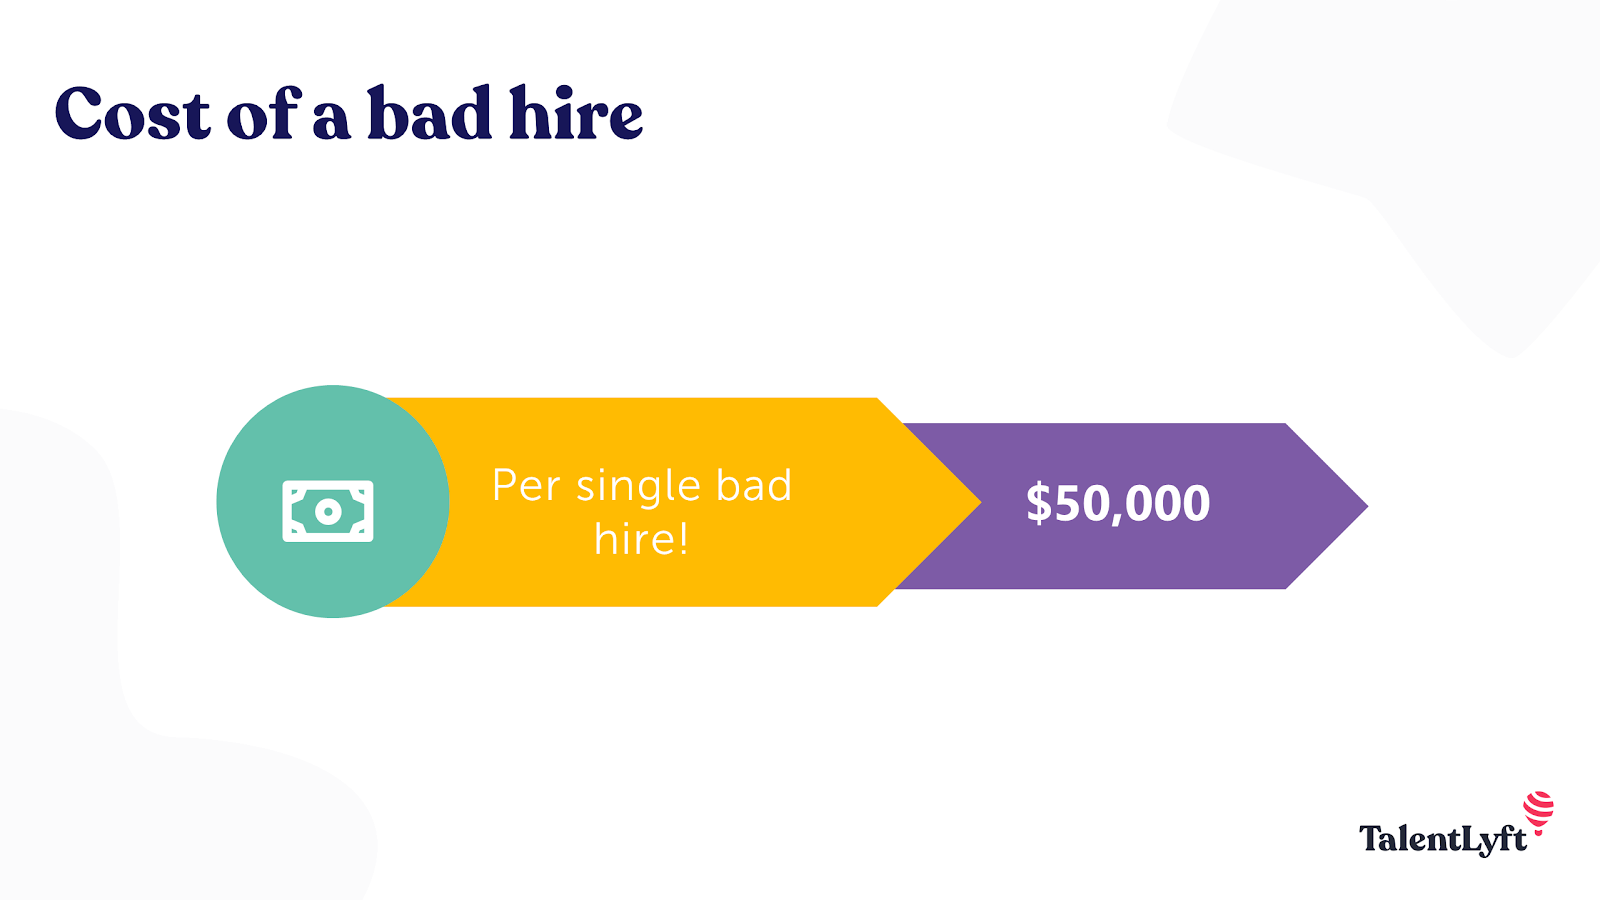 Cost of a bad hire statistic